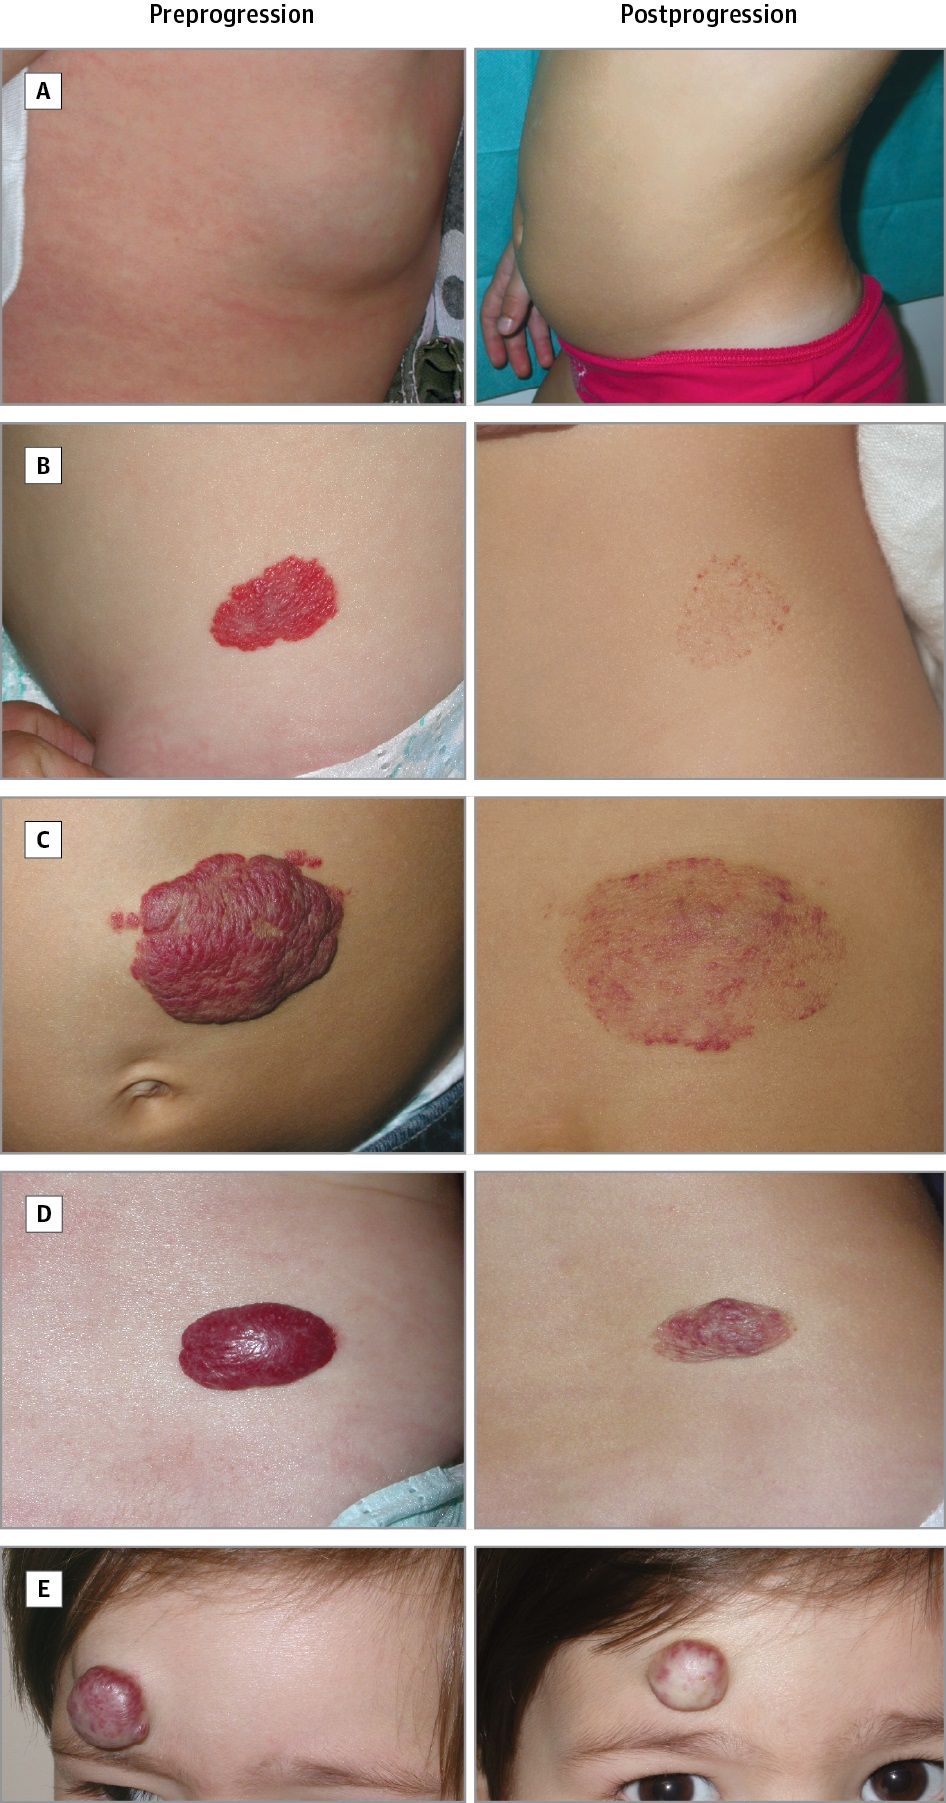 Photographs showing different types of hemangioma sequelae, pre-progression and post-progression.